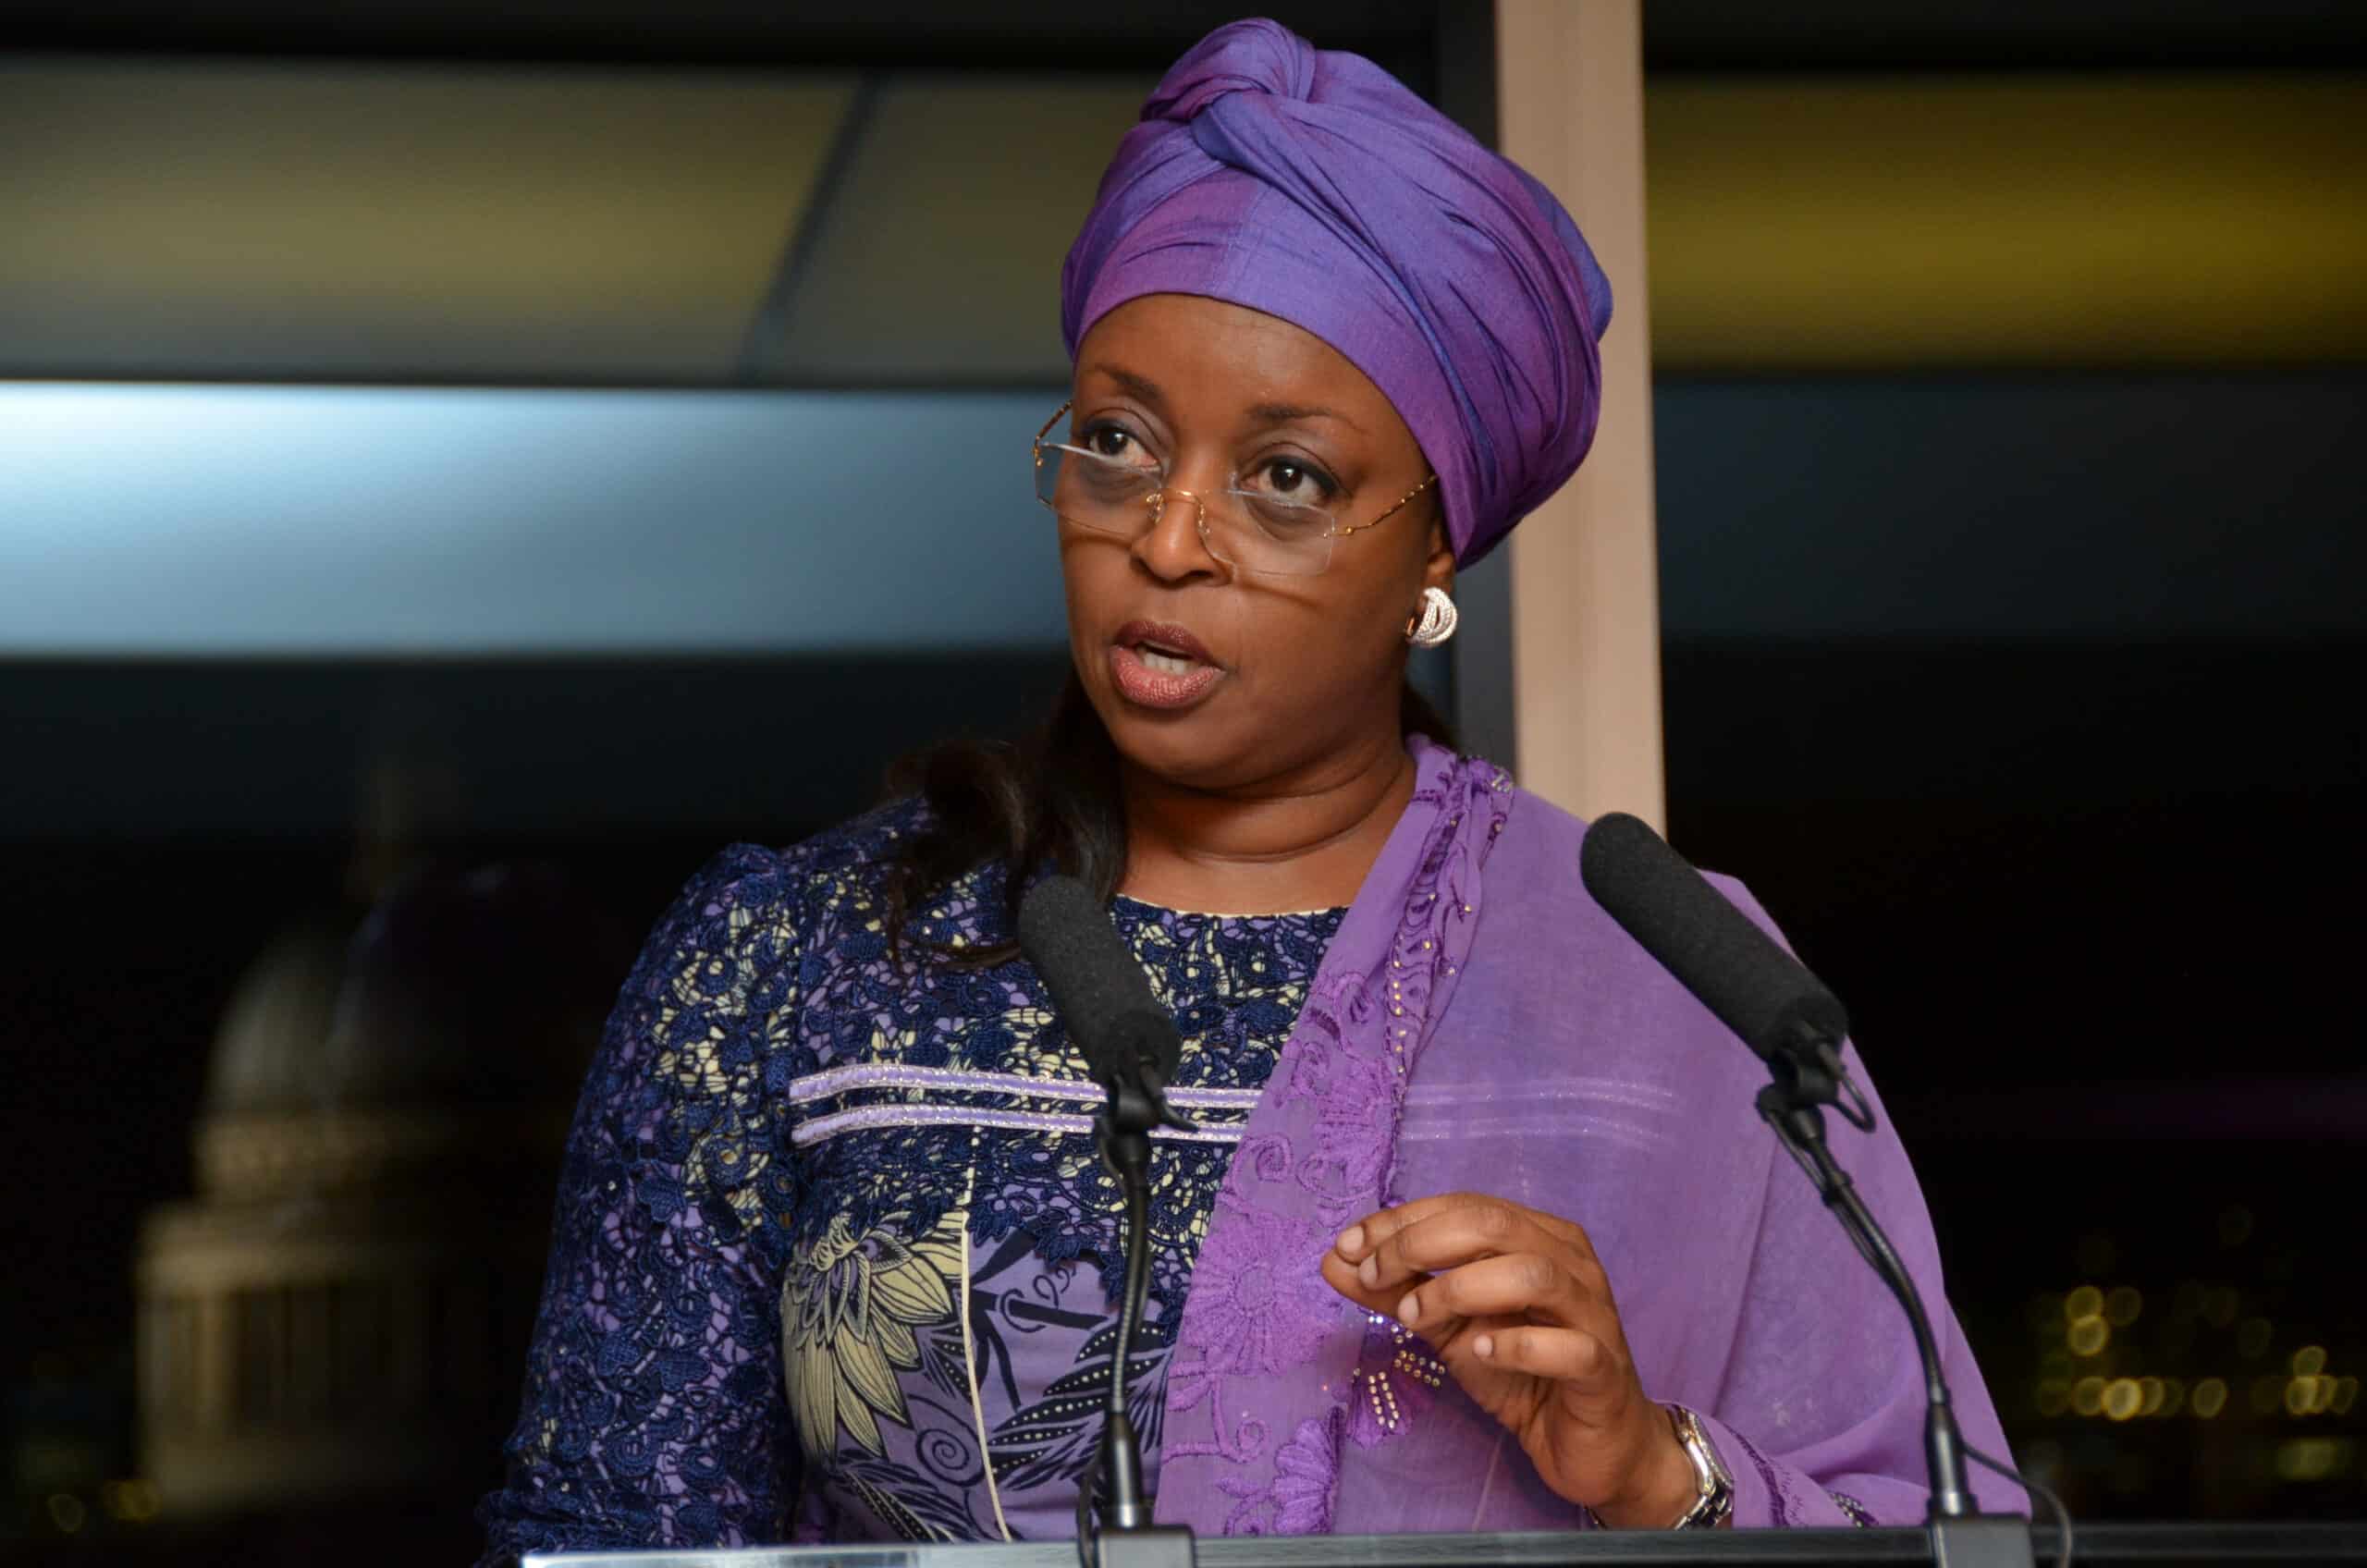 Former Nigerian Petroleum Minister, Diezani Alison-Madueke, Appears in London Court to Face Bribery Charges